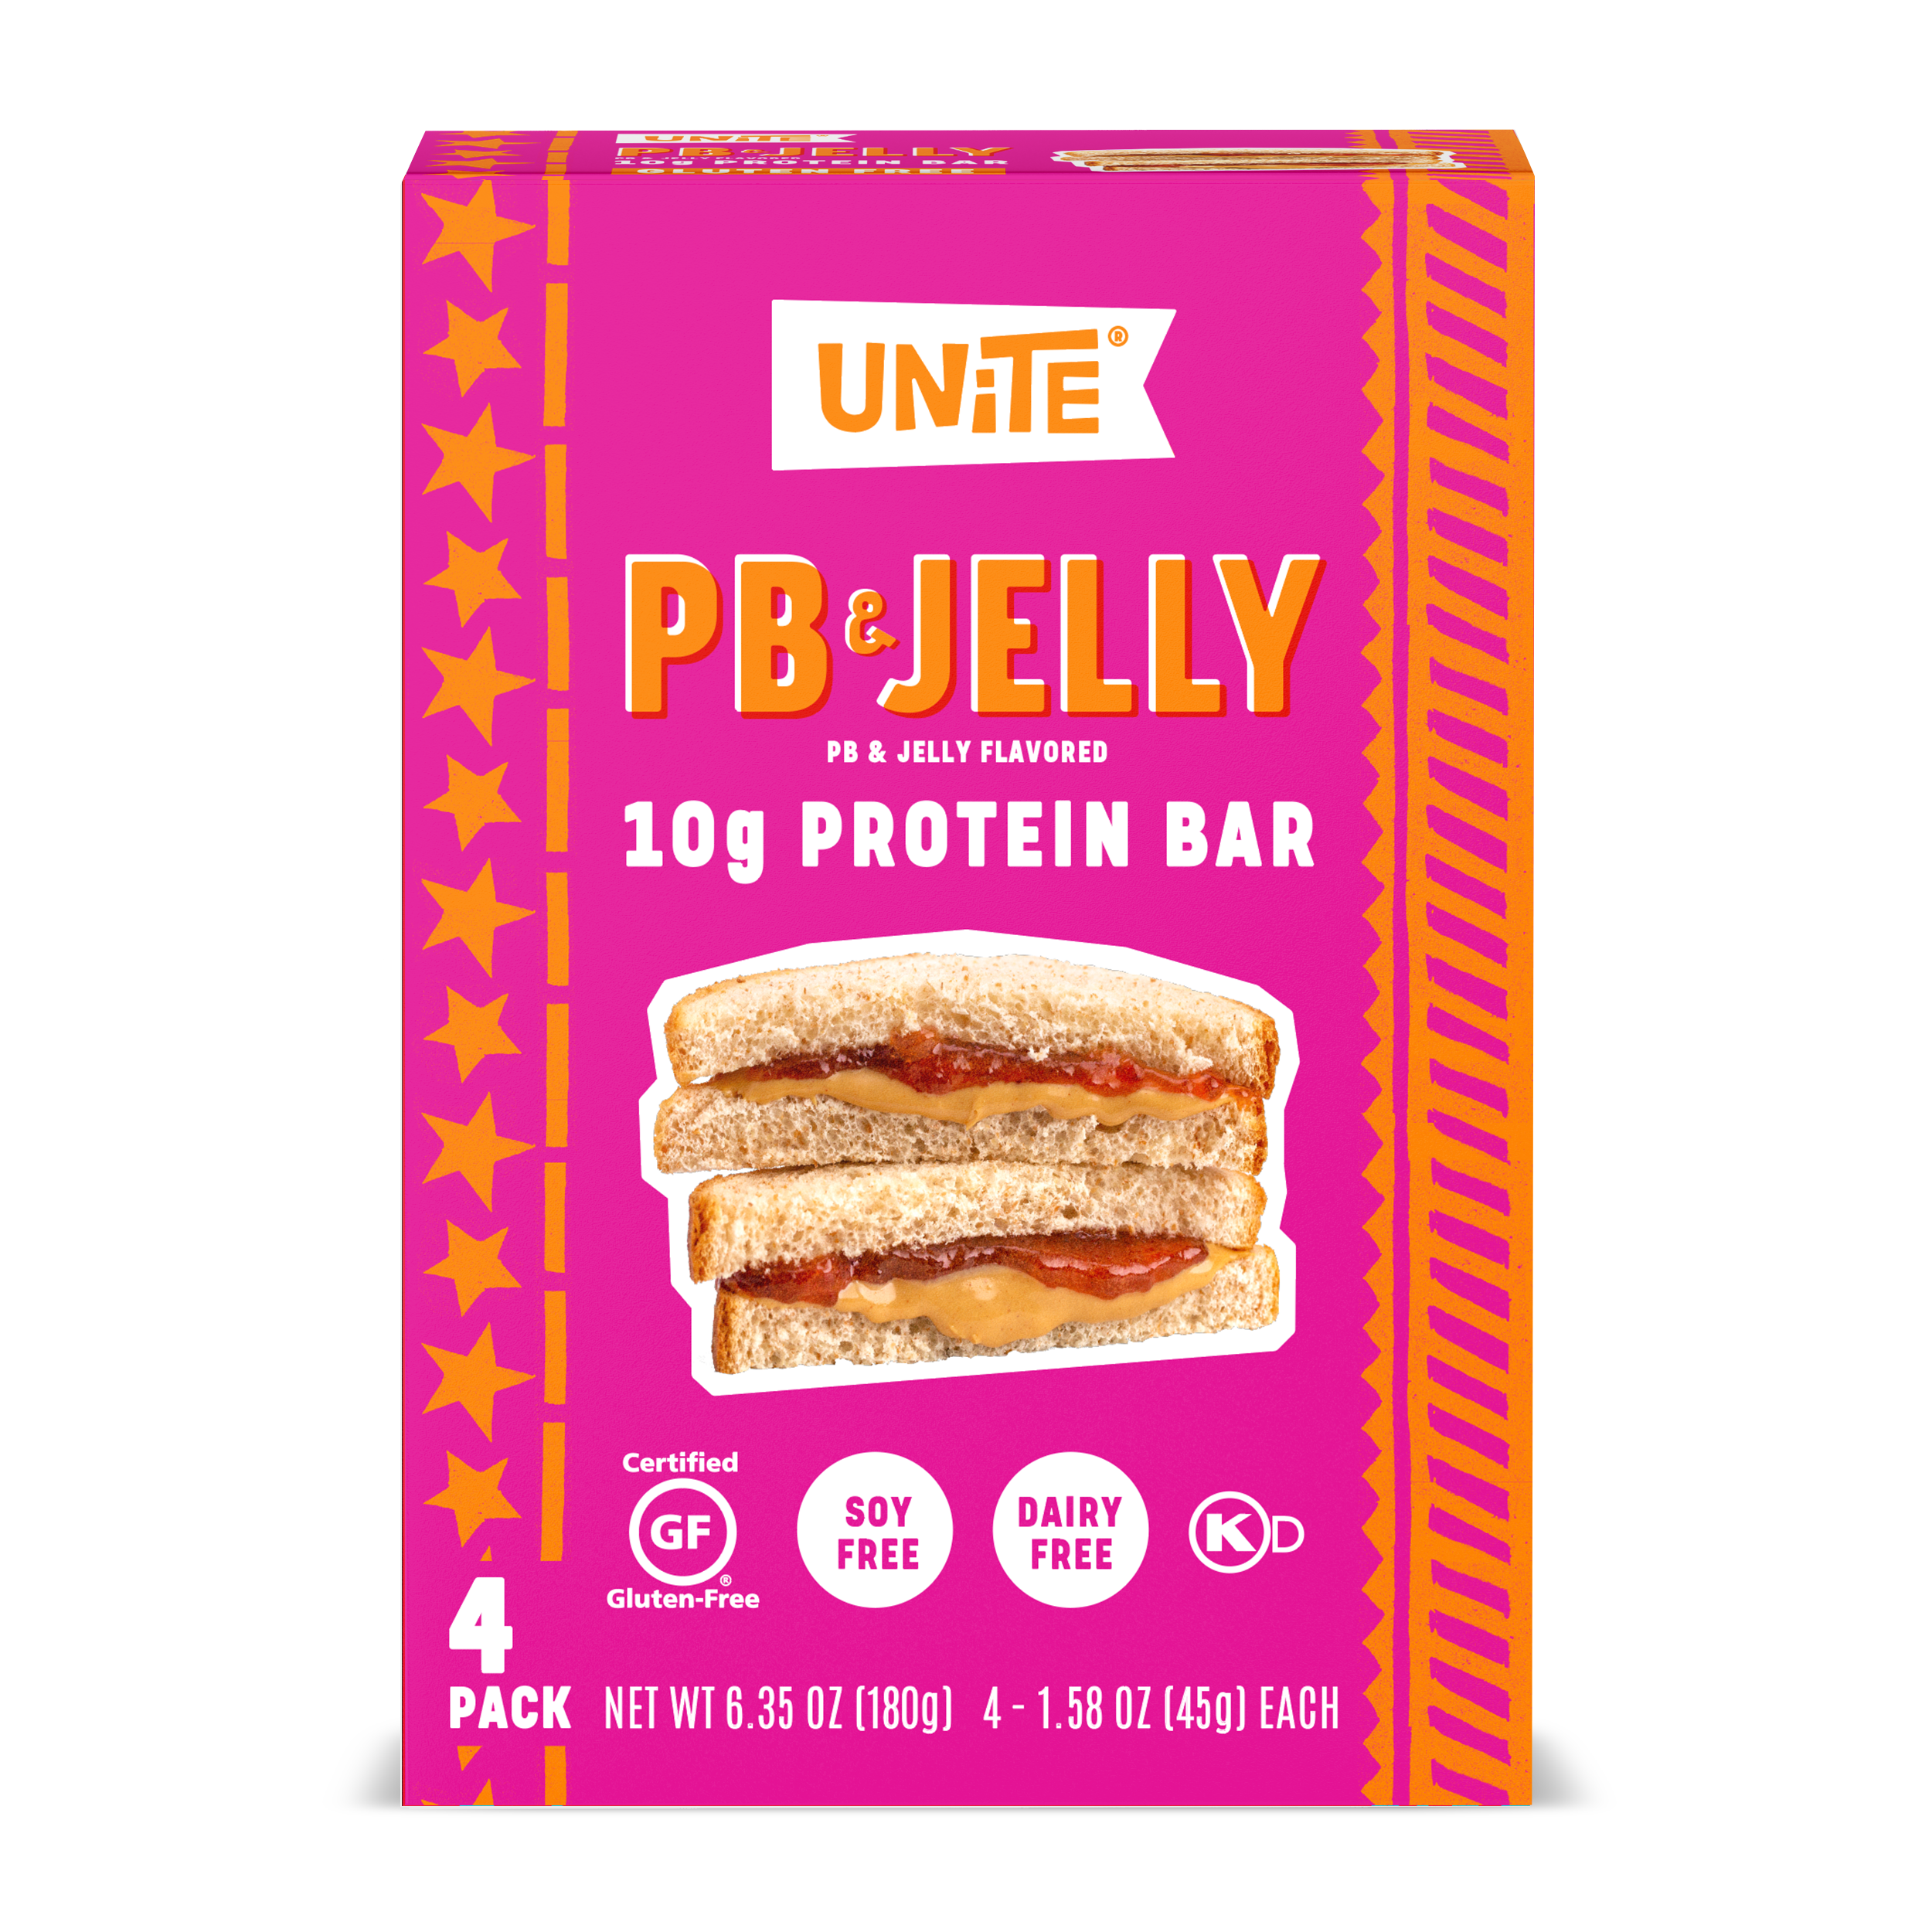 Unite Food High-Protein Bar, Peanut Butter and Jelly, 4 Ct, 1.58 oz. - image 1 of 7